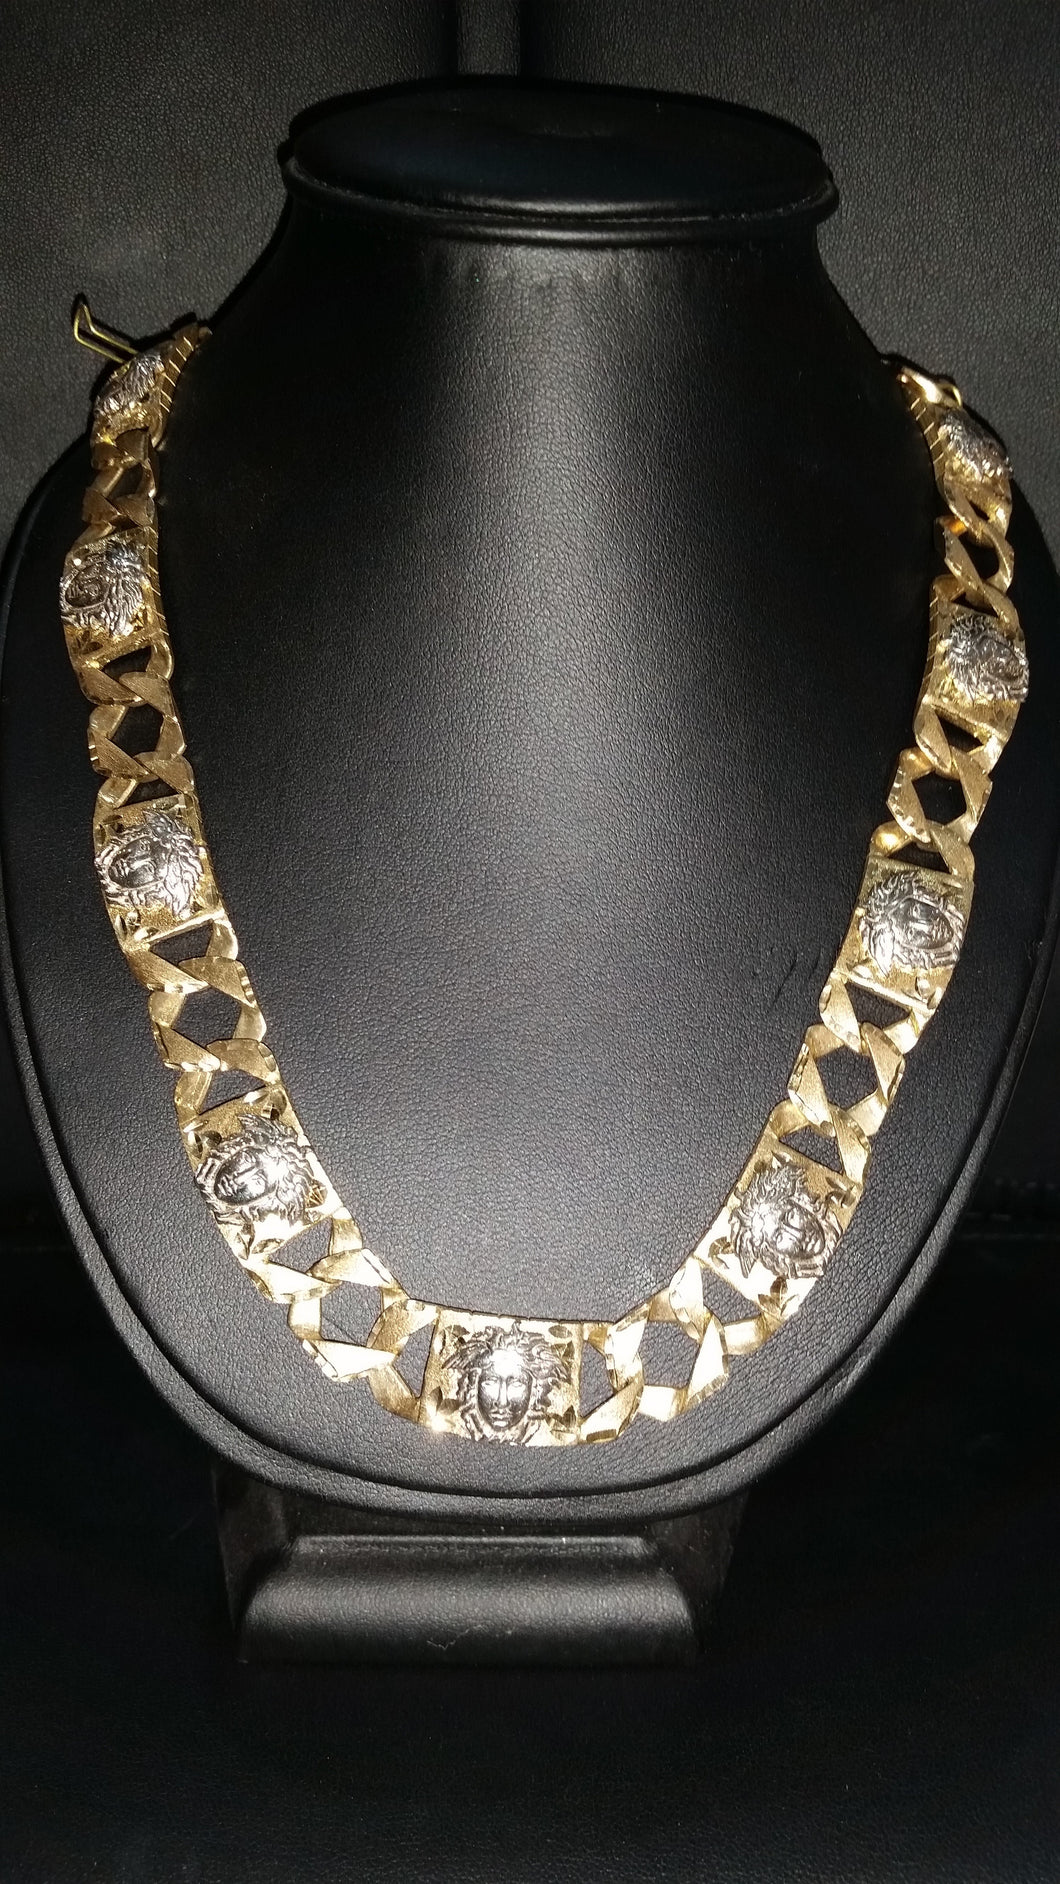 10kt Versace Link Chain 10KVER1 – Gold 